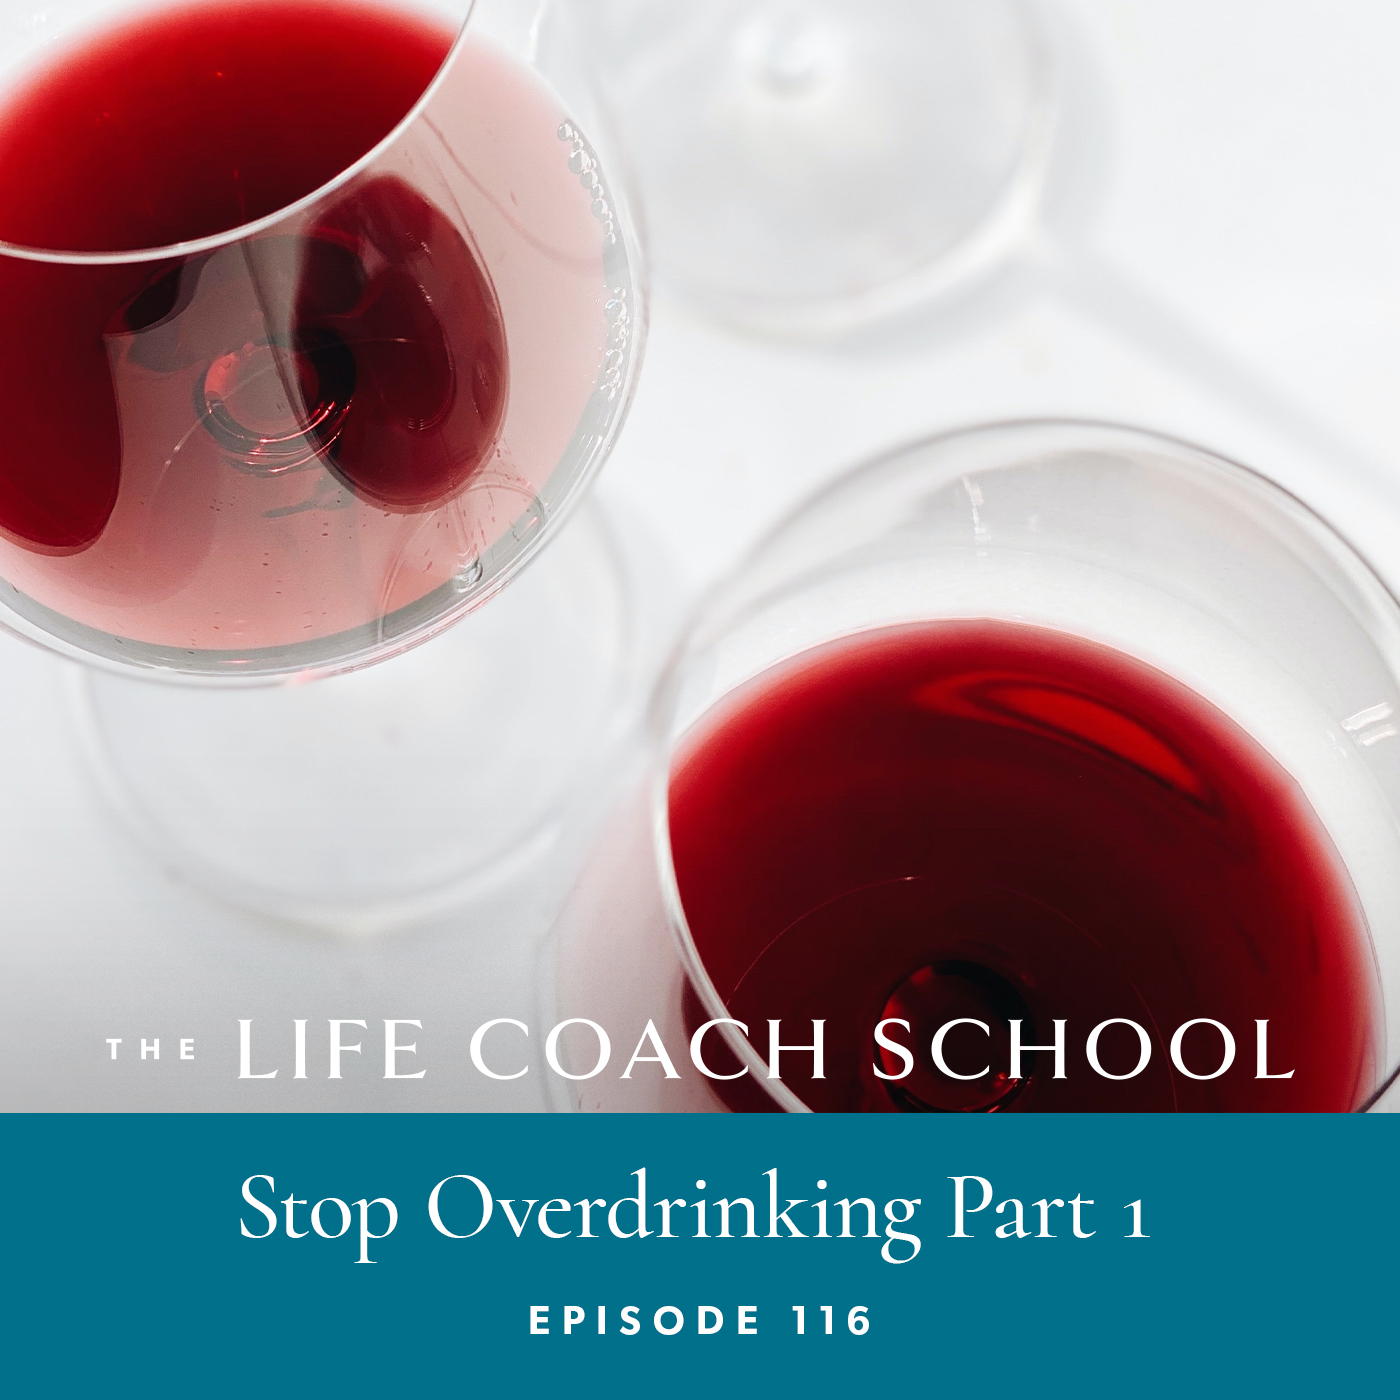 The Life Coach School Podcast with Brooke Castillo | Episode 116 | Stop Overdrinking Part 1